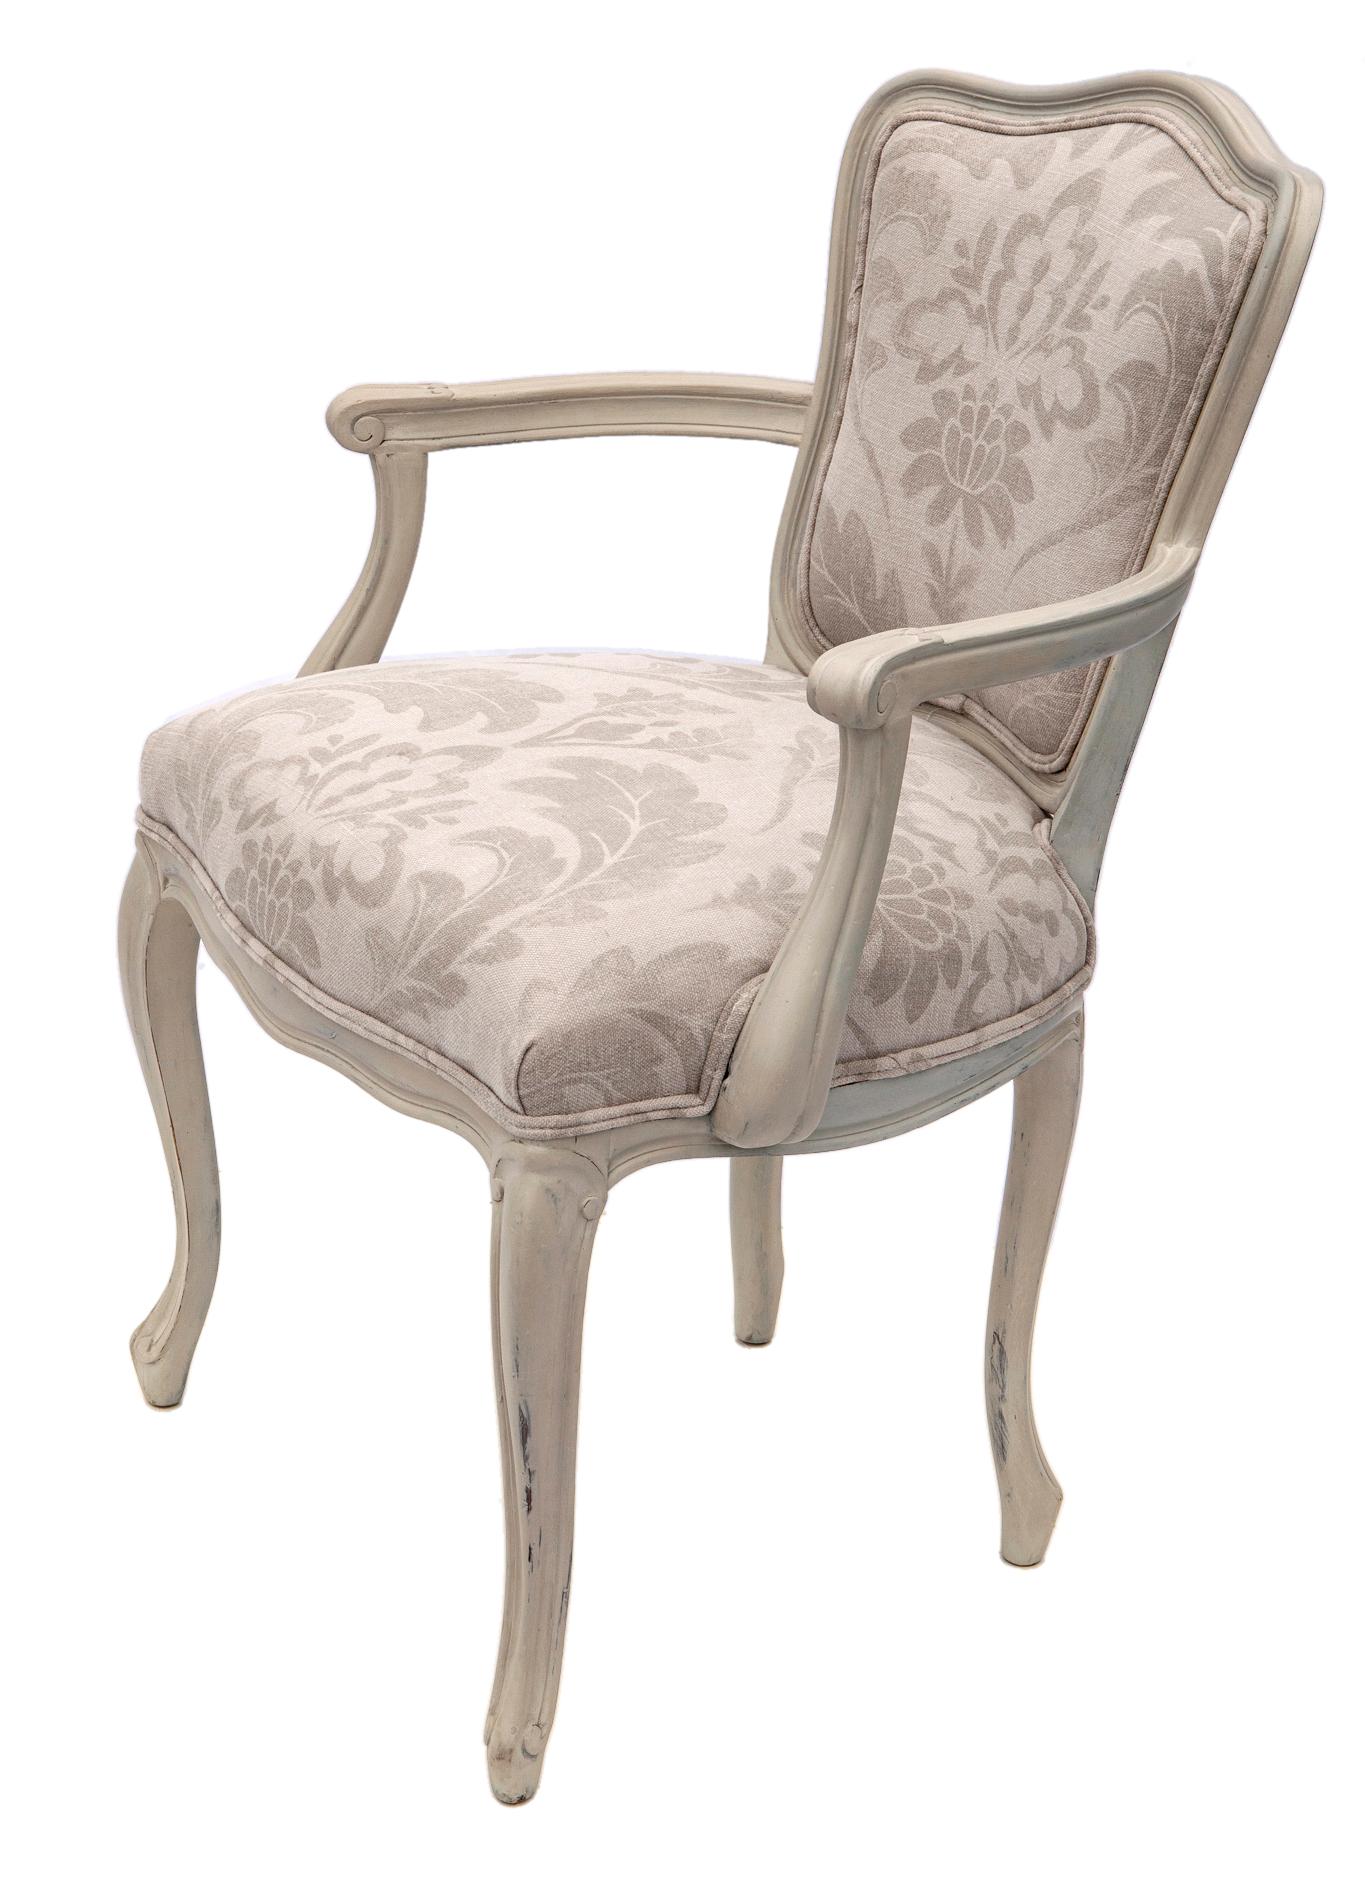 This stunning chair features elegant curves hand painted in shades of gray.
It has been reupholstered in a linen 